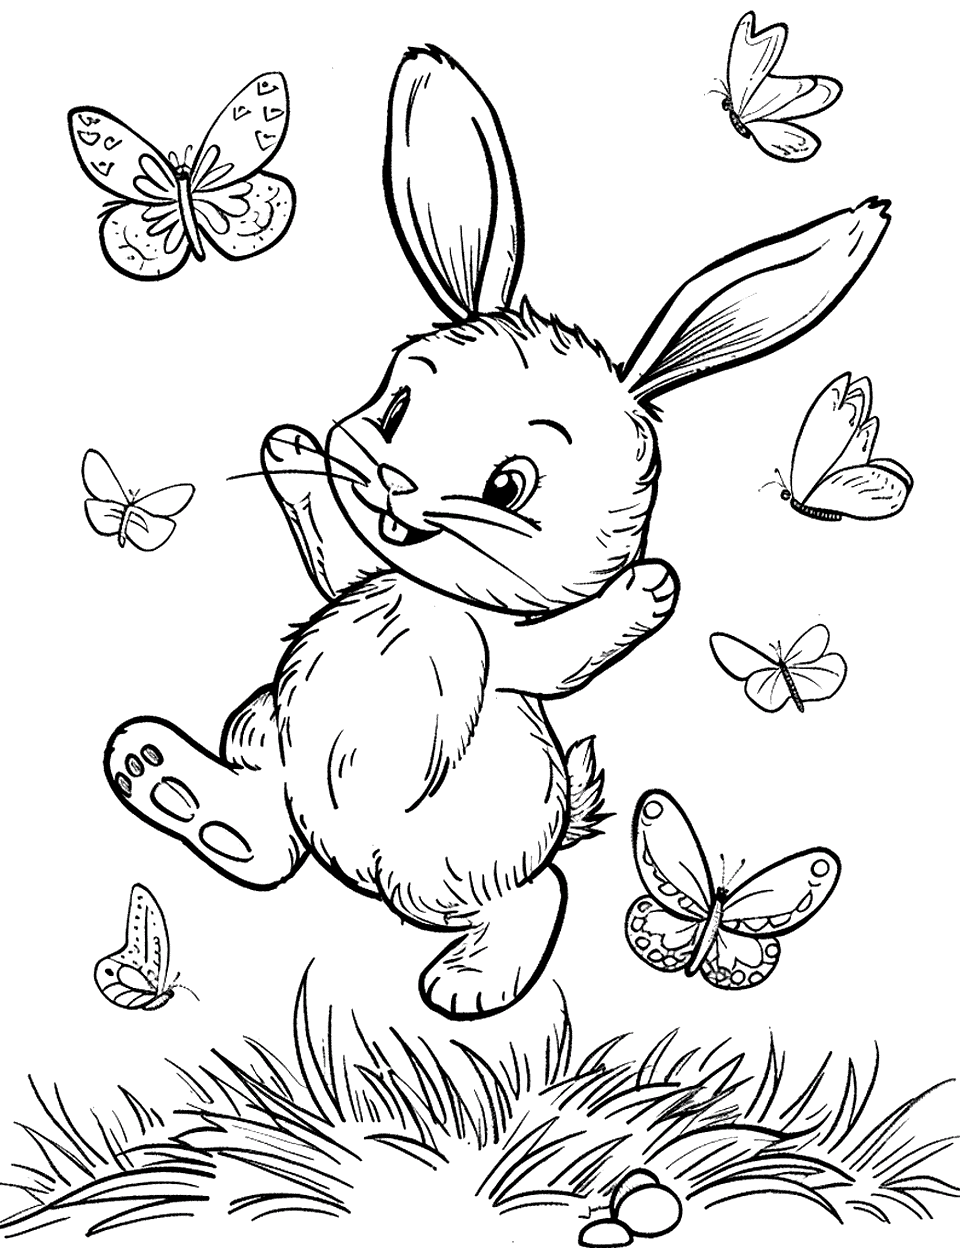 Springtime Fun Easter Bunny Coloring Page - A bunny joyfully jumping in a field with butterflies fluttering around.